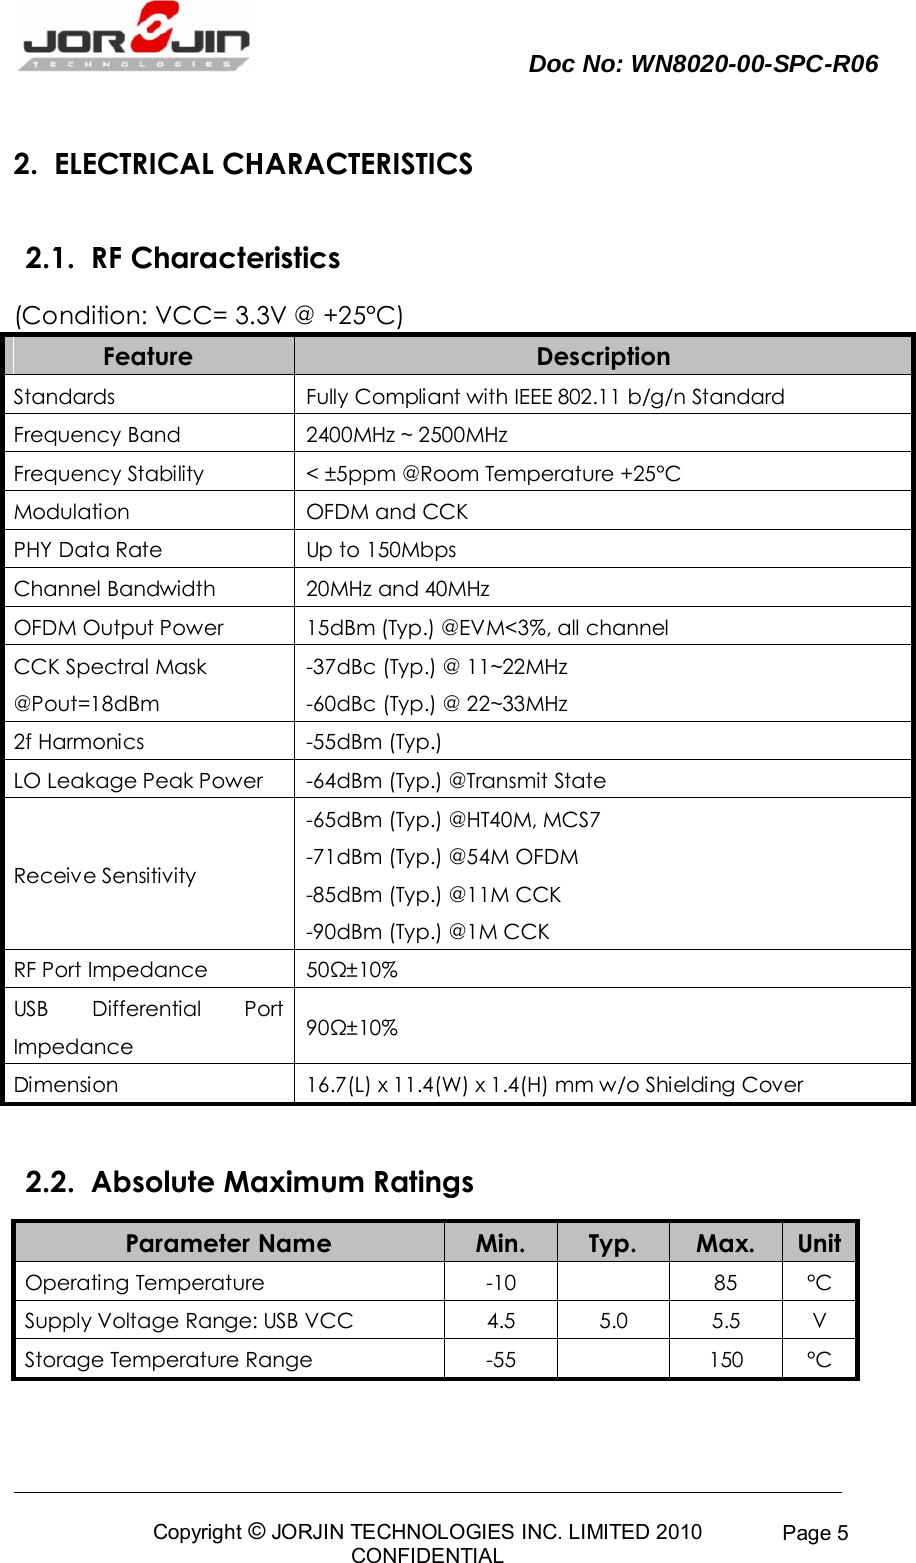     Doc No: WN8020-00-SPC-R06                                                                                          Copyright © JORJIN TECHNOLOGIES INC. LIMITED 2010 CONFIDENTIAL Page 5 2.  ELECTRICAL CHARACTERISTICS 2.1.  RF Characteristics (Condition: VCC= 3.3V @ +25°C) Feature Description Standards Fully Compliant with IEEE 802.11 b/g/n Standard Frequency Band 2400MHz ~ 2500MHz Frequency Stability &lt; ±5ppm @Room Temperature +25°C Modulation OFDM and CCK P HY  D at a  Rat e Up   to 150Mbps Channel Bandwidth 20MHz and 40MHz OFDM Output Power 15dBm (Typ.) @EVM&lt;3%, all channel CCK Spectral Mask @Pout=18dBm -37dBc (Typ.) @ 11~22MHz -60dBc (Typ.) @ 22~33MHz 2f Harmonics -55dBm (Typ.) LO Leakage Peak Power -64dBm (Typ.) @Transmit State Receive Sensitivity -65dBm (Typ.) @HT40M, MCS7 -71dBm (Typ.) @54M OFDM -85dBm (Typ.) @11M CCK -90dBm (Typ.) @1M CCK RF Port Impedance 50Ω±10% USB  Differential  Port Impedance 90Ω±10% Dimension 16.7(L) x 11.4(W) x 1.4(H) mm w/o Shielding Cover  2.2.  Absolute Maximum Ratings Parameter Name Min. Typ. Max. Unit Operating Temperature -10  85 °C Supply Voltage Range: USB VCC 4.5 5.0 5.5 V Storage Temperature Range -55  150 °C  